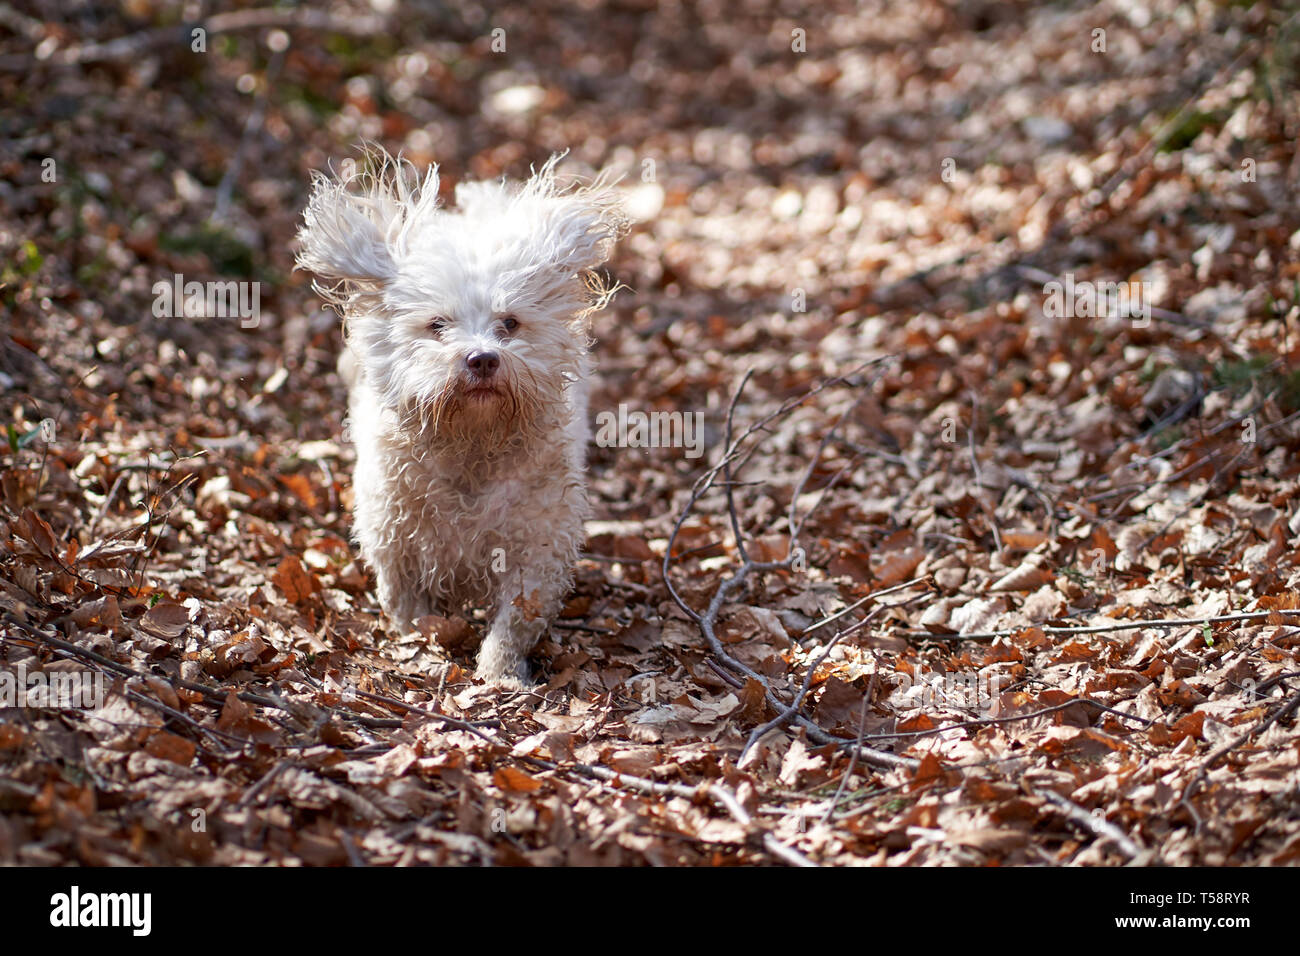 White havanese dog running in the forest Stock Photo